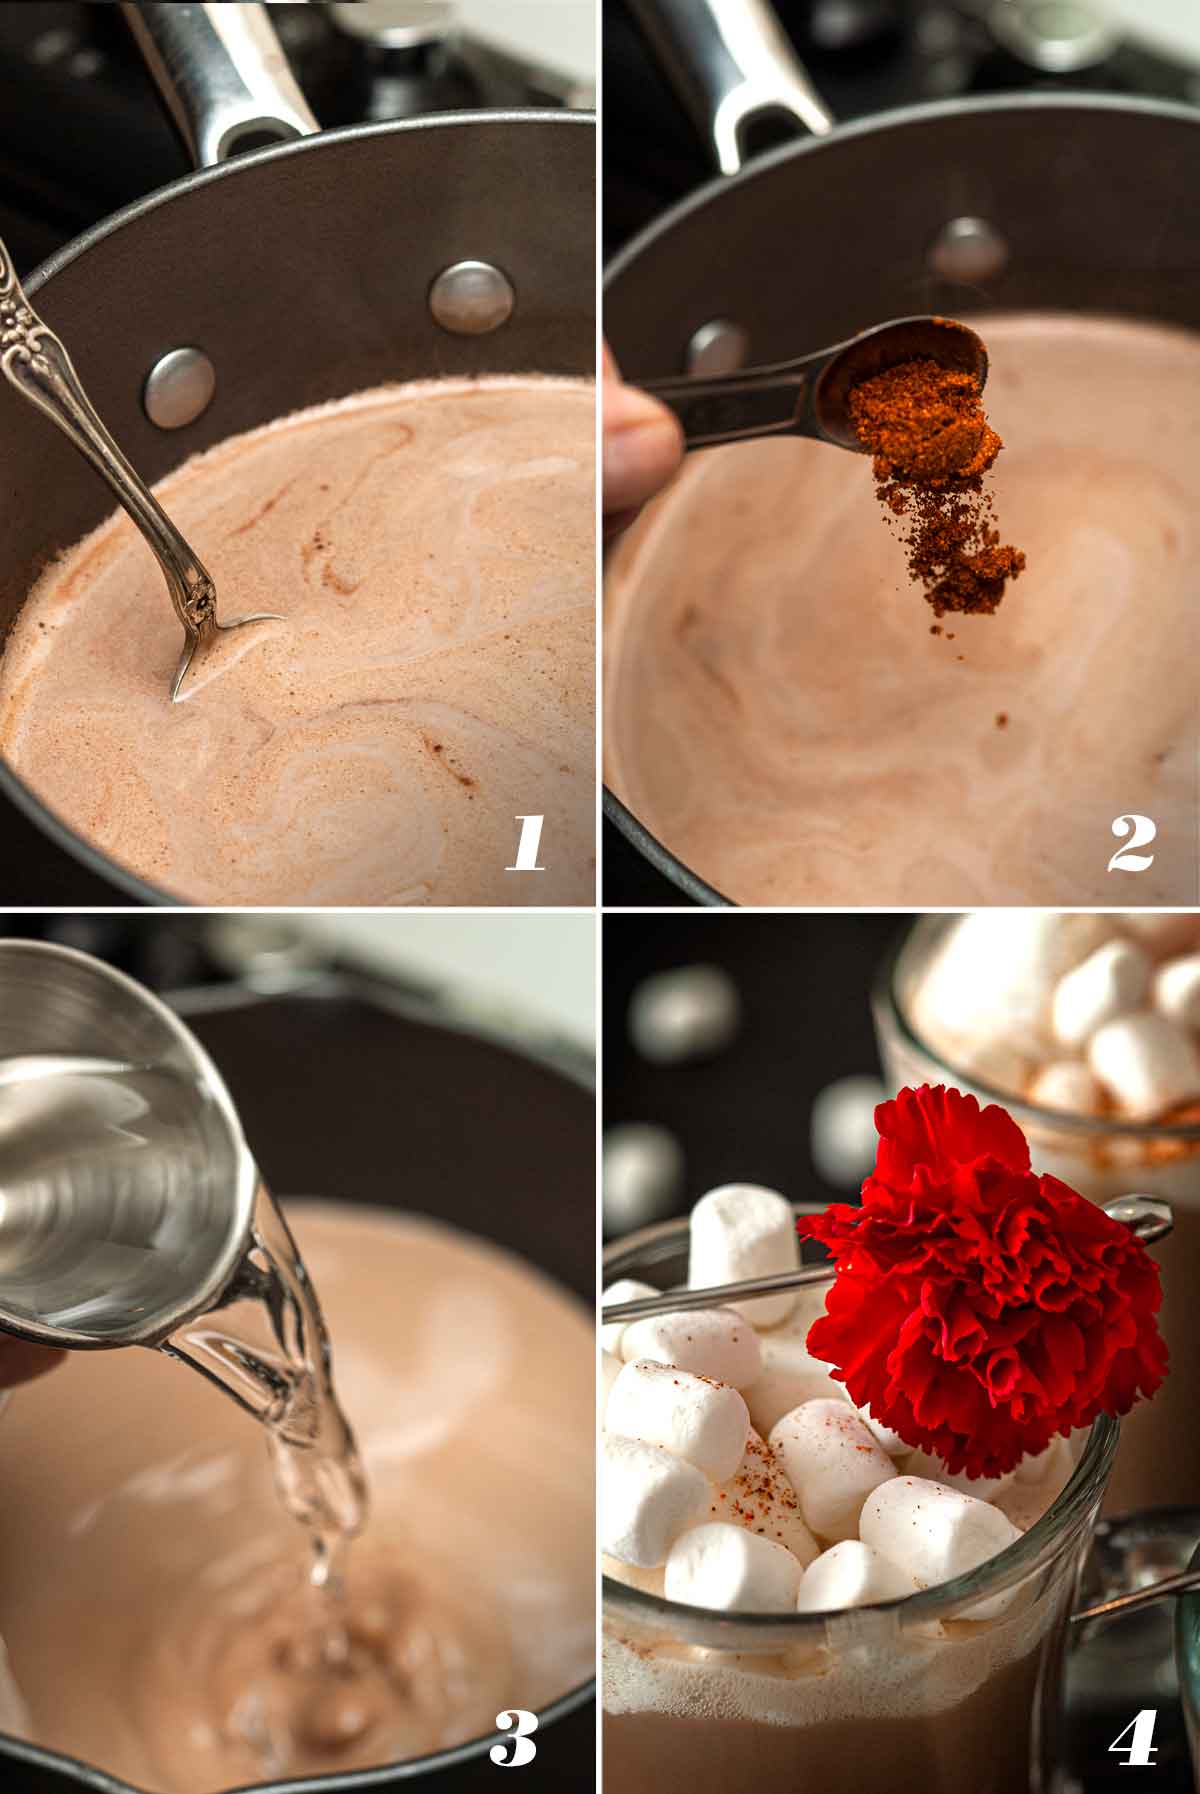 A collage of 4 numbered images showing how to make spicy hot chocolate.